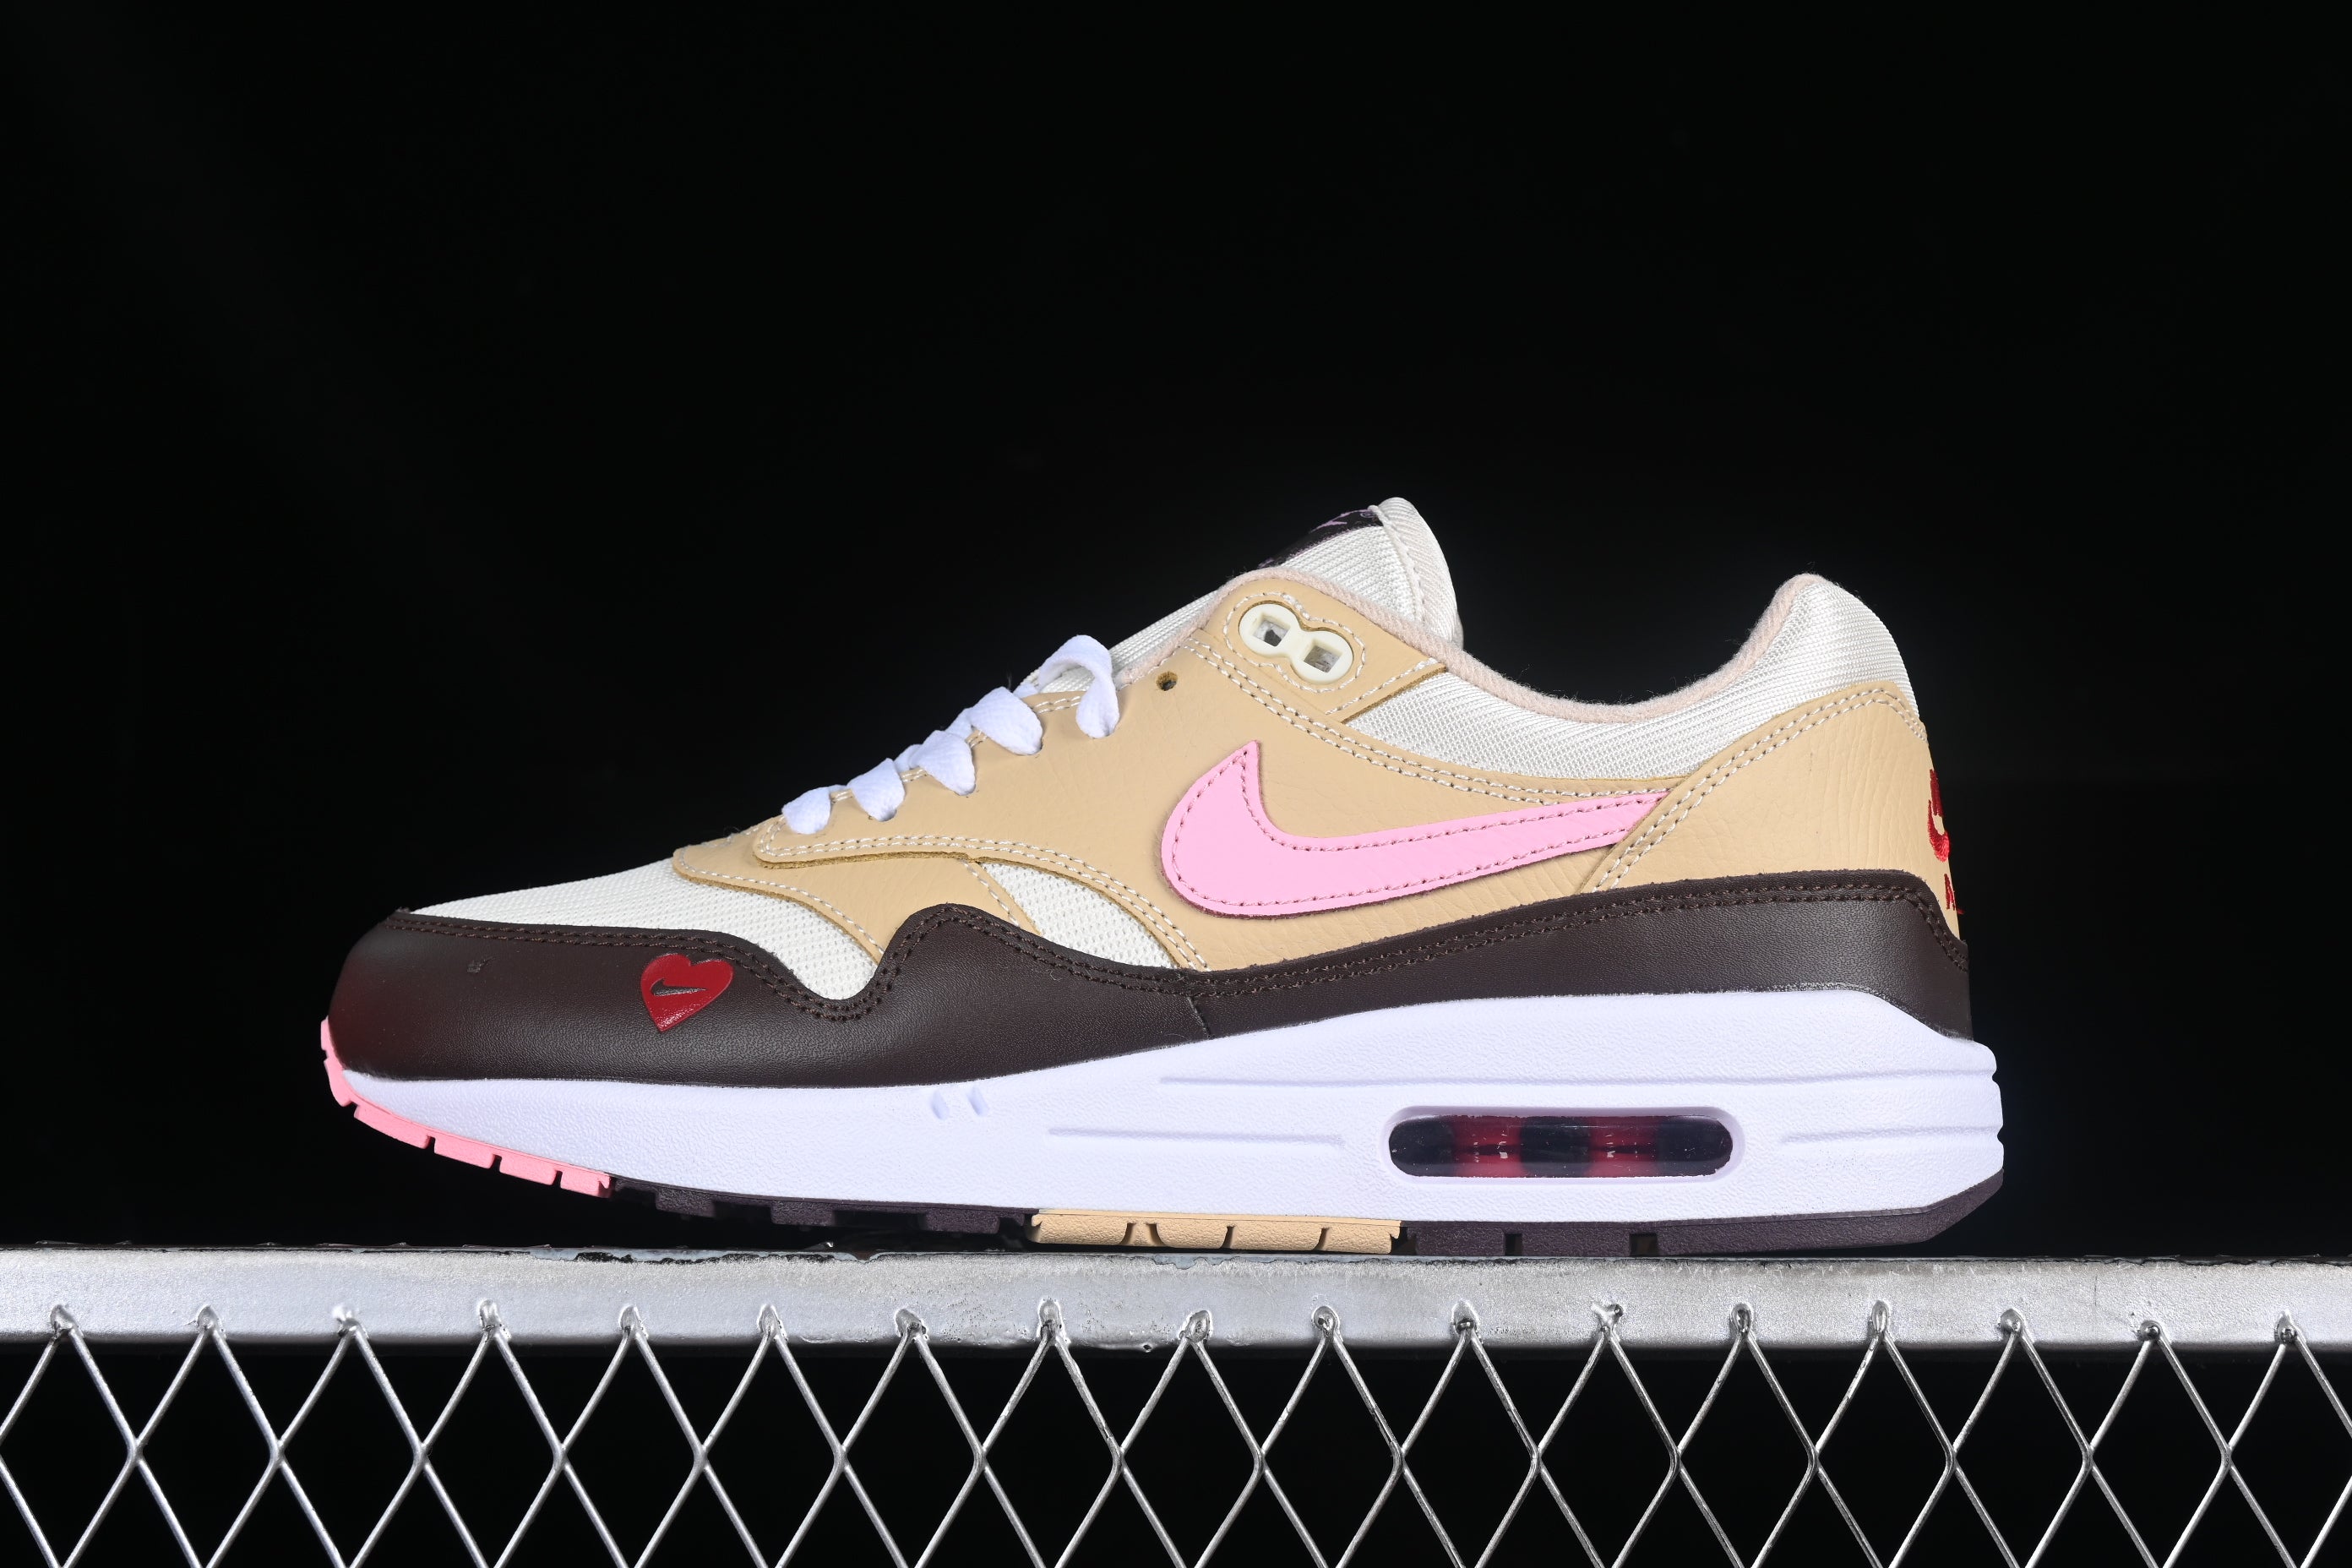 NikeWMNS Air Max 1 AM1 Valentine's Day -  Scoops Up Stussy